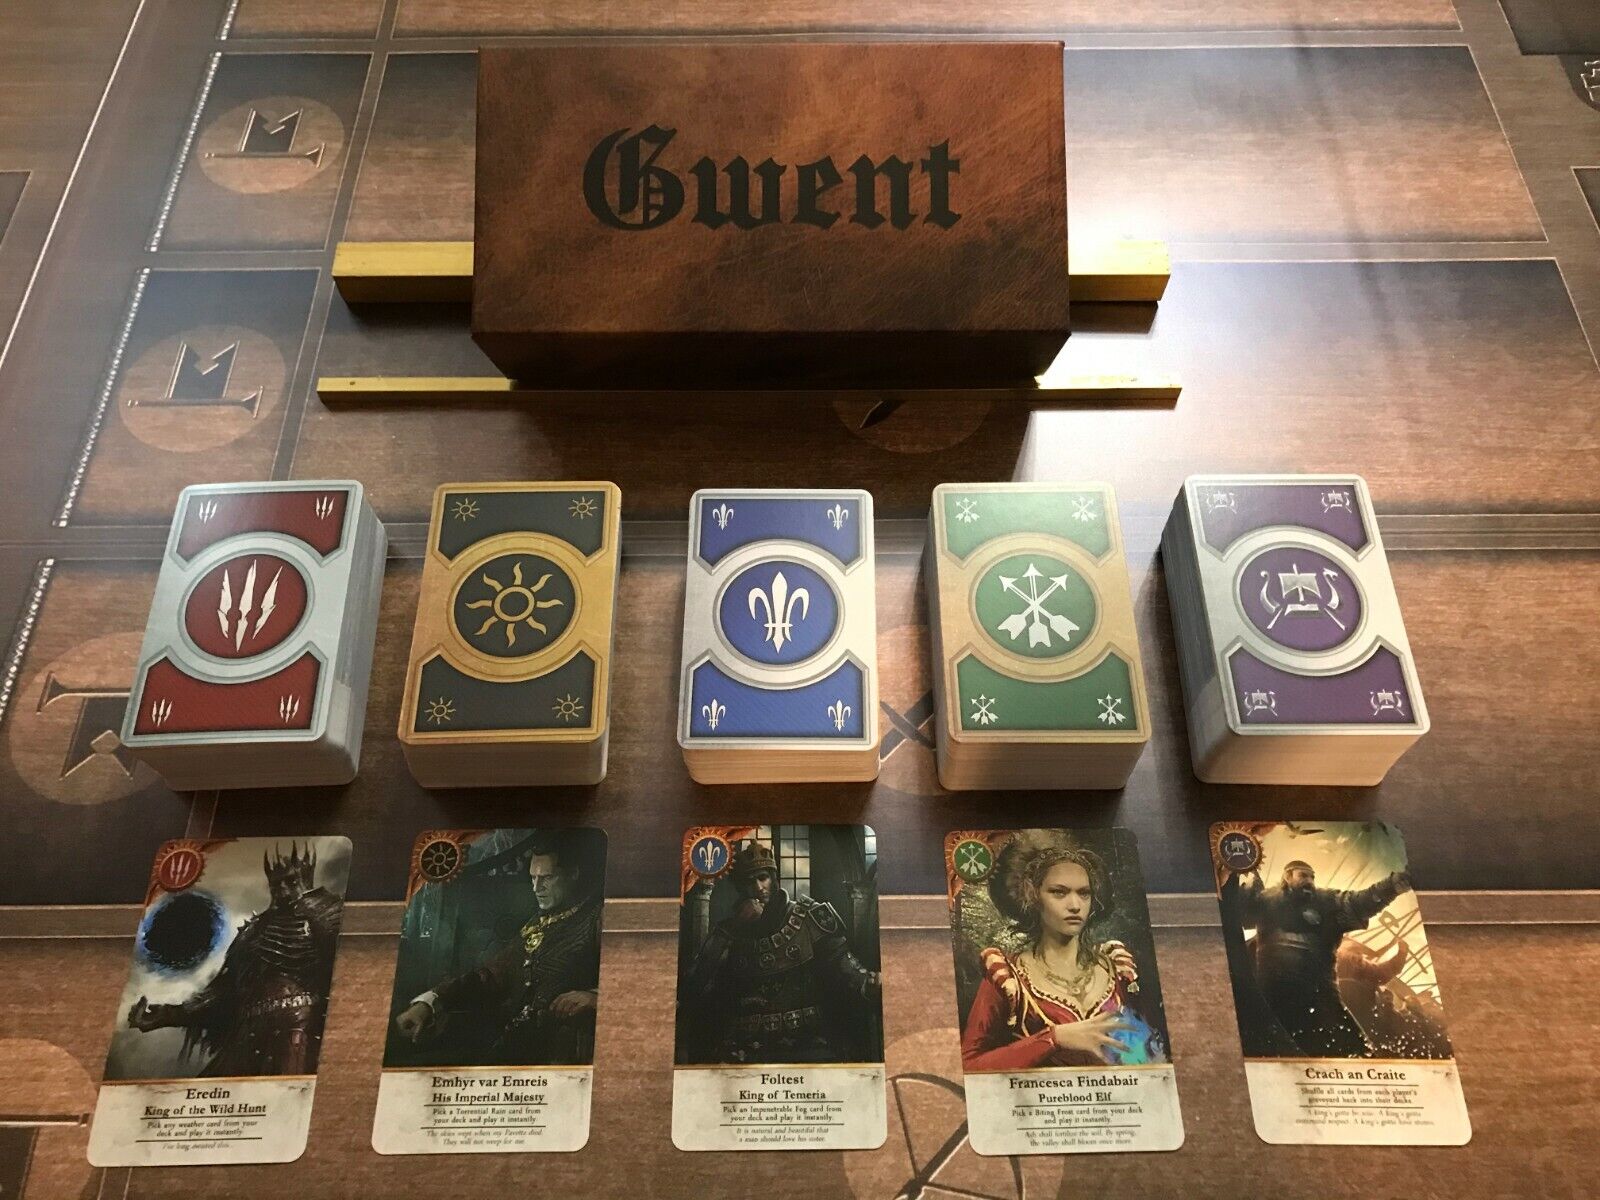 GWENT CARDS (5 DECKS) Witcher 3 COMPLETE SET with BOX